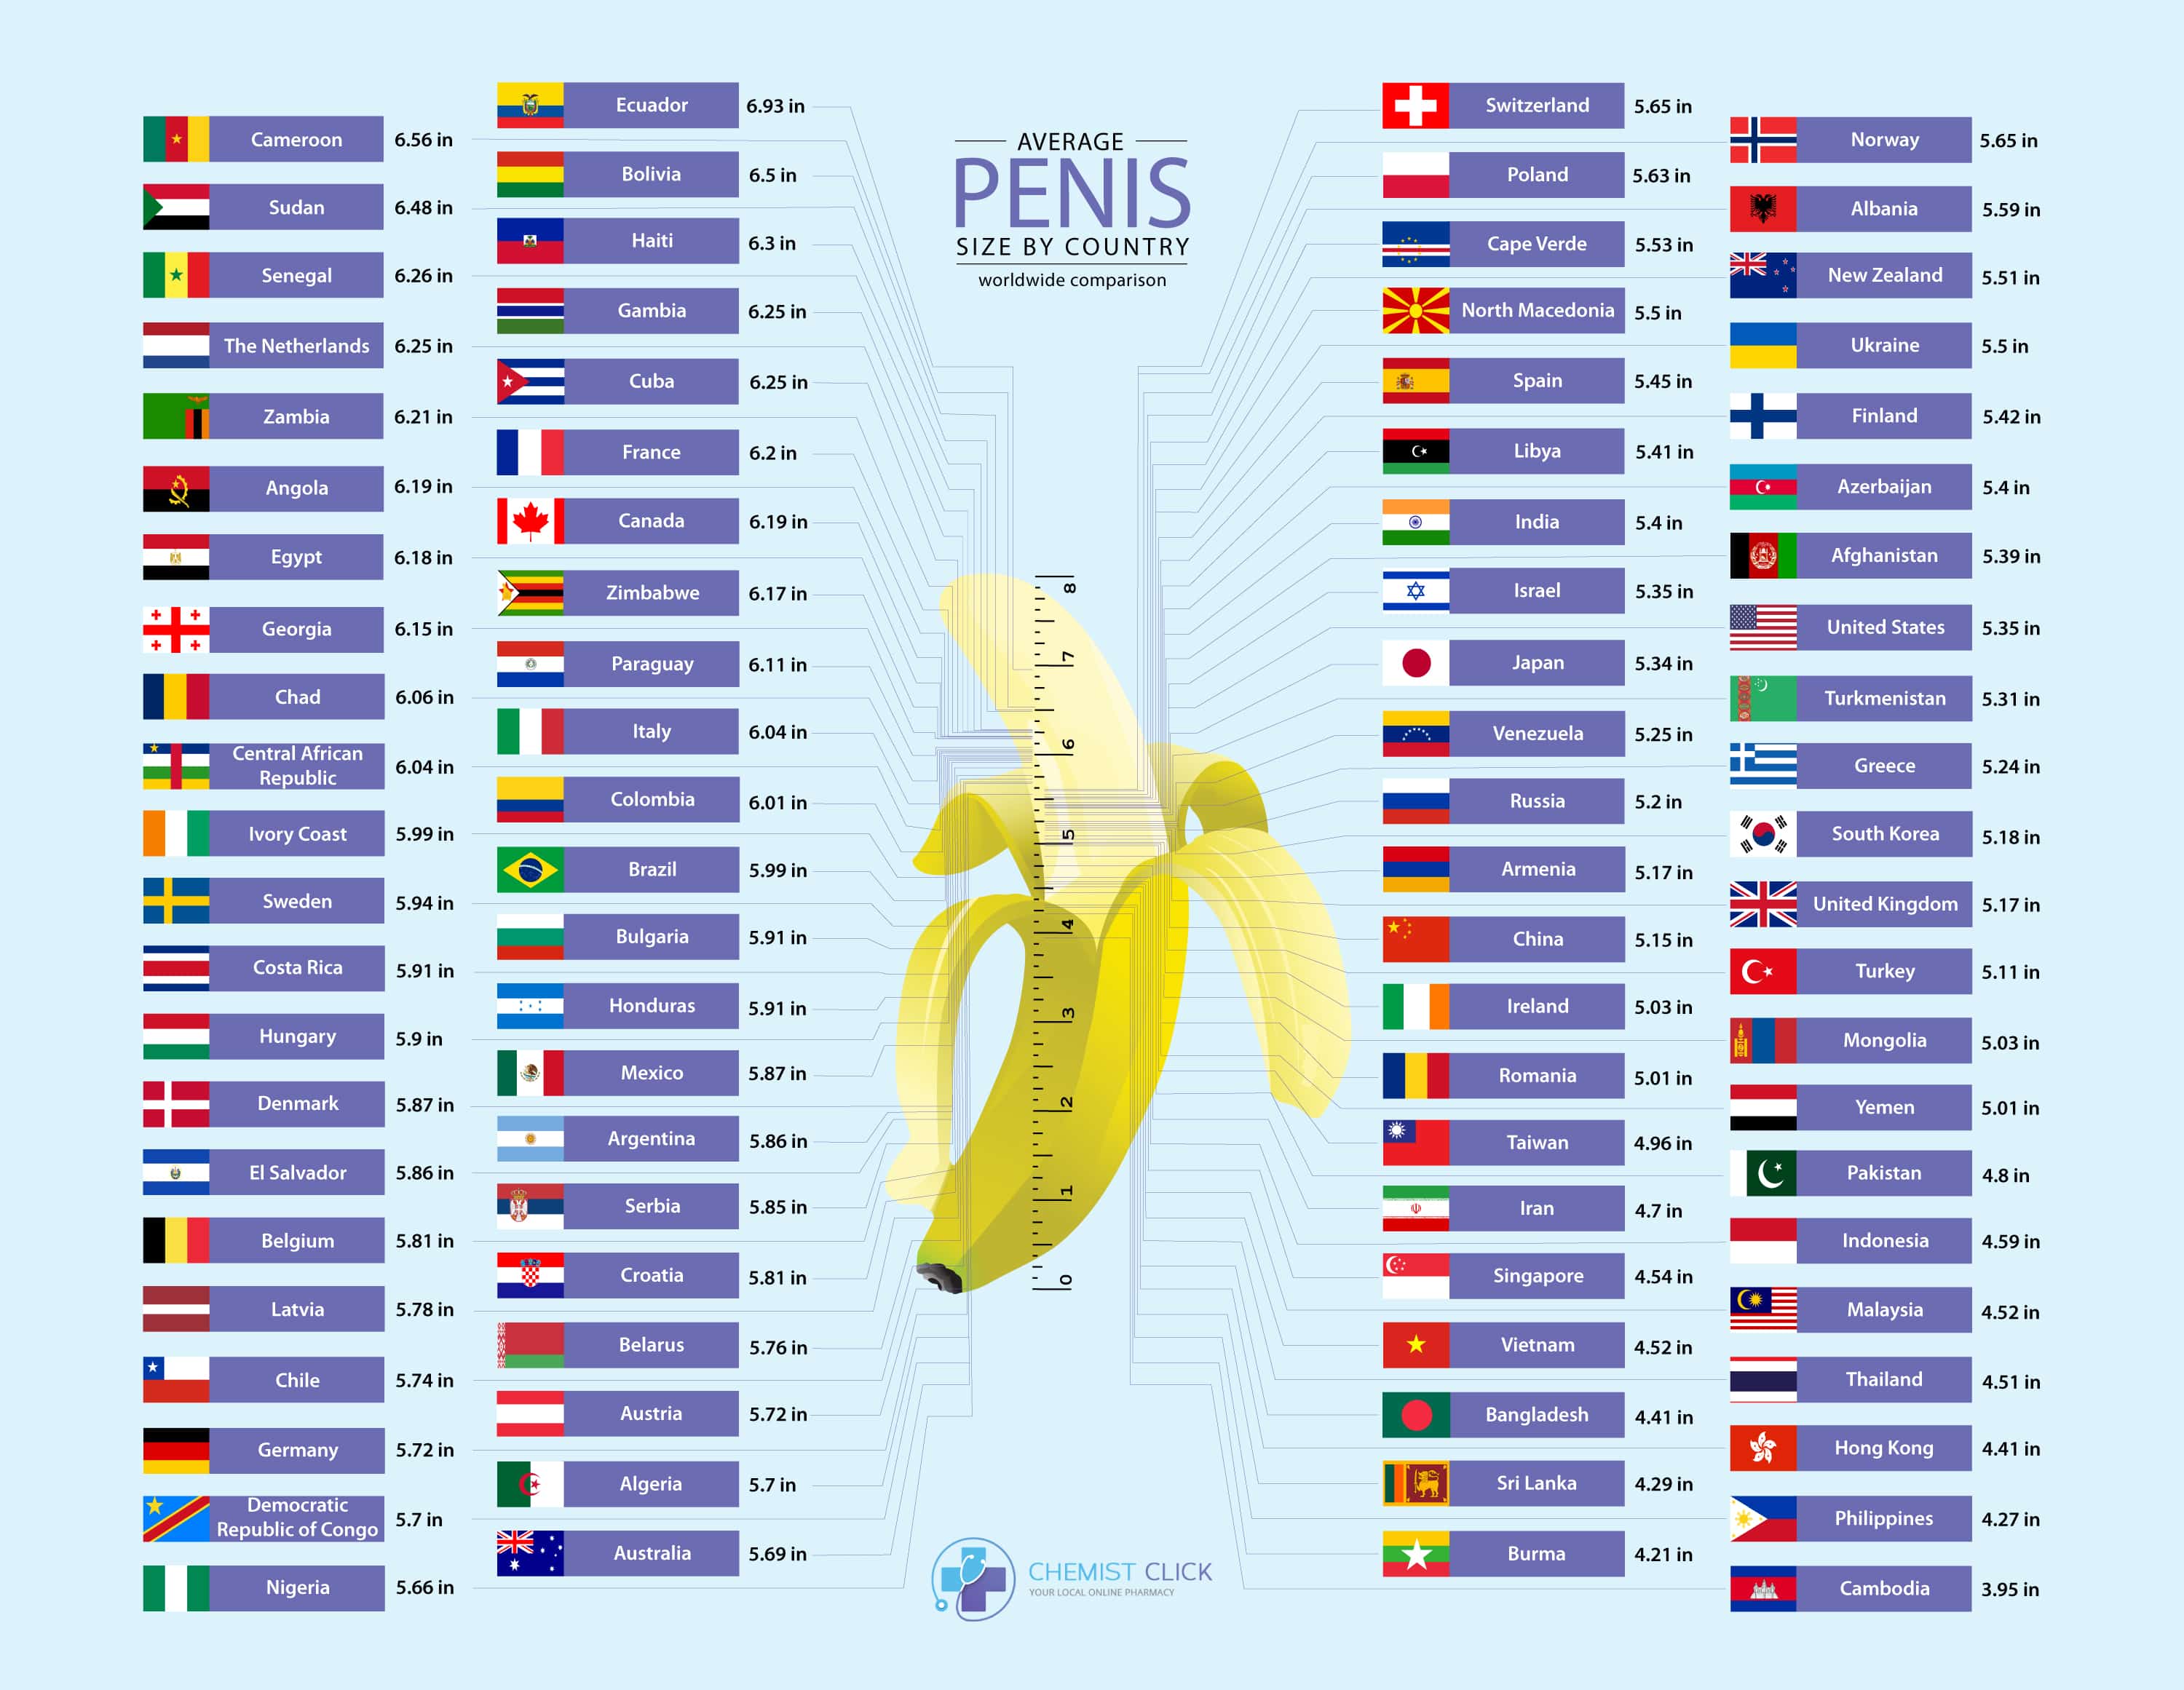 Average dick size per country in inches